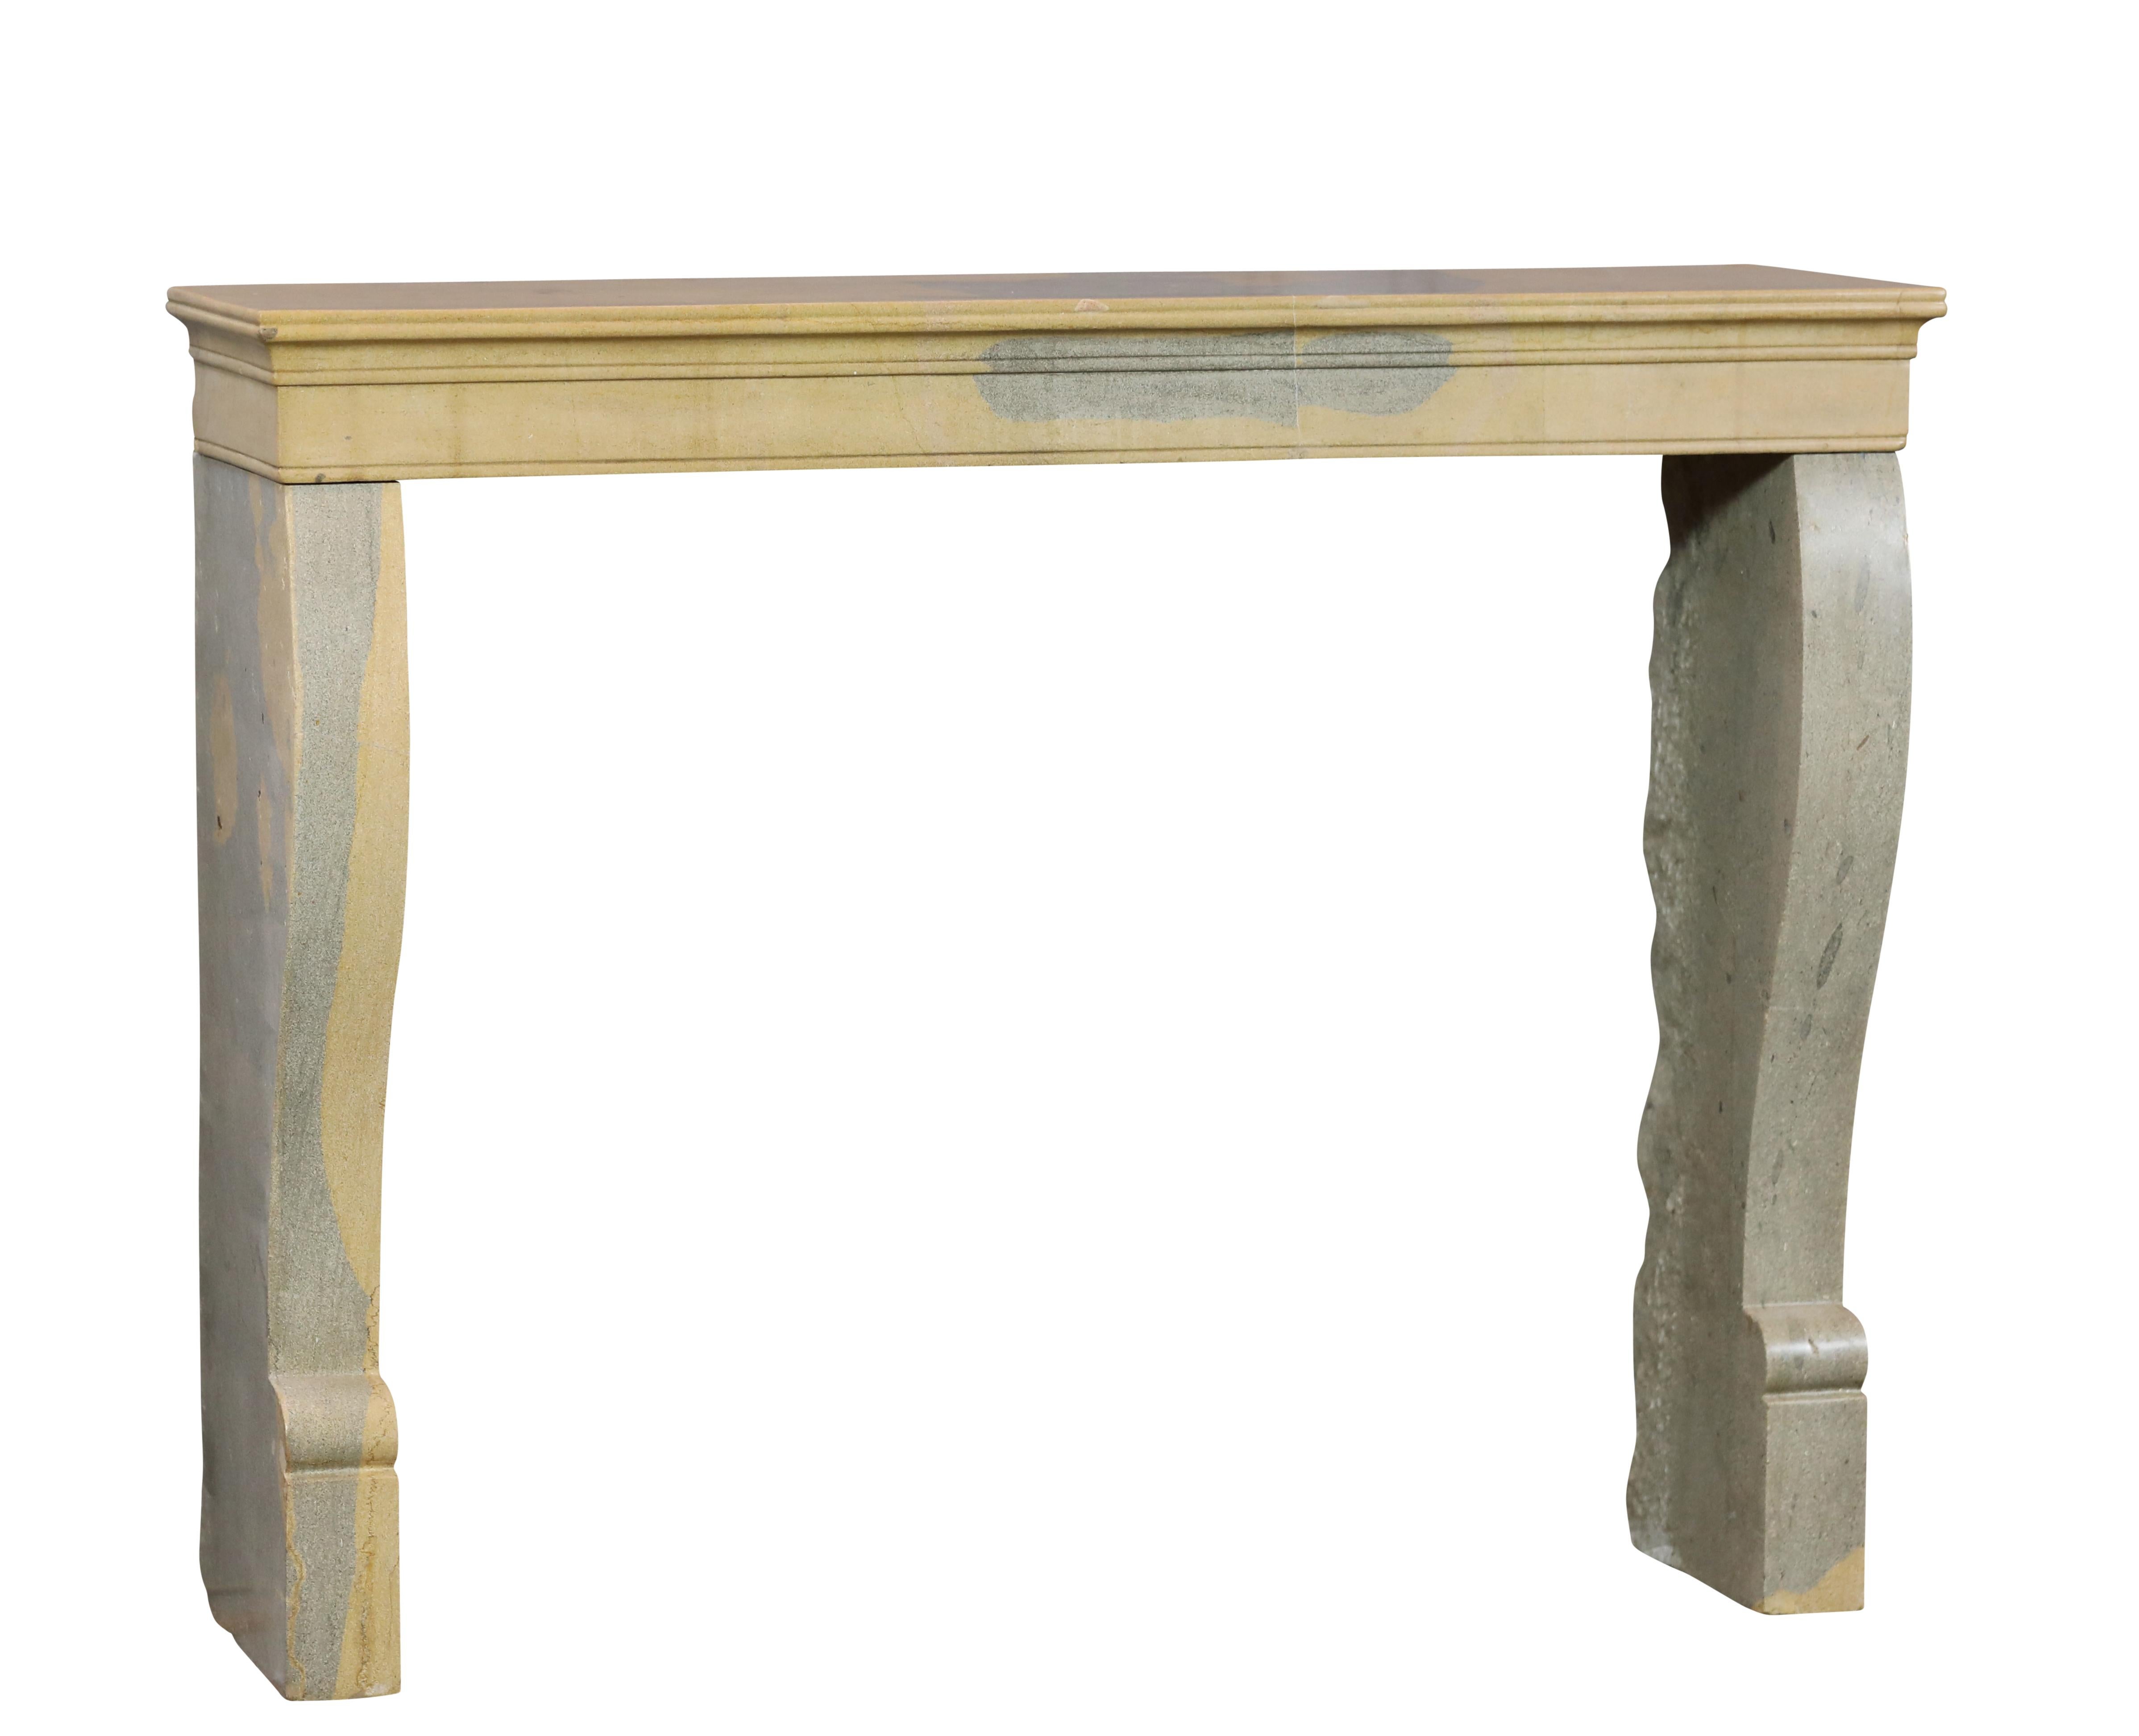 Elegant Bicolor Stone Fireplace Surround For Timeless Interior Design For Sale 3